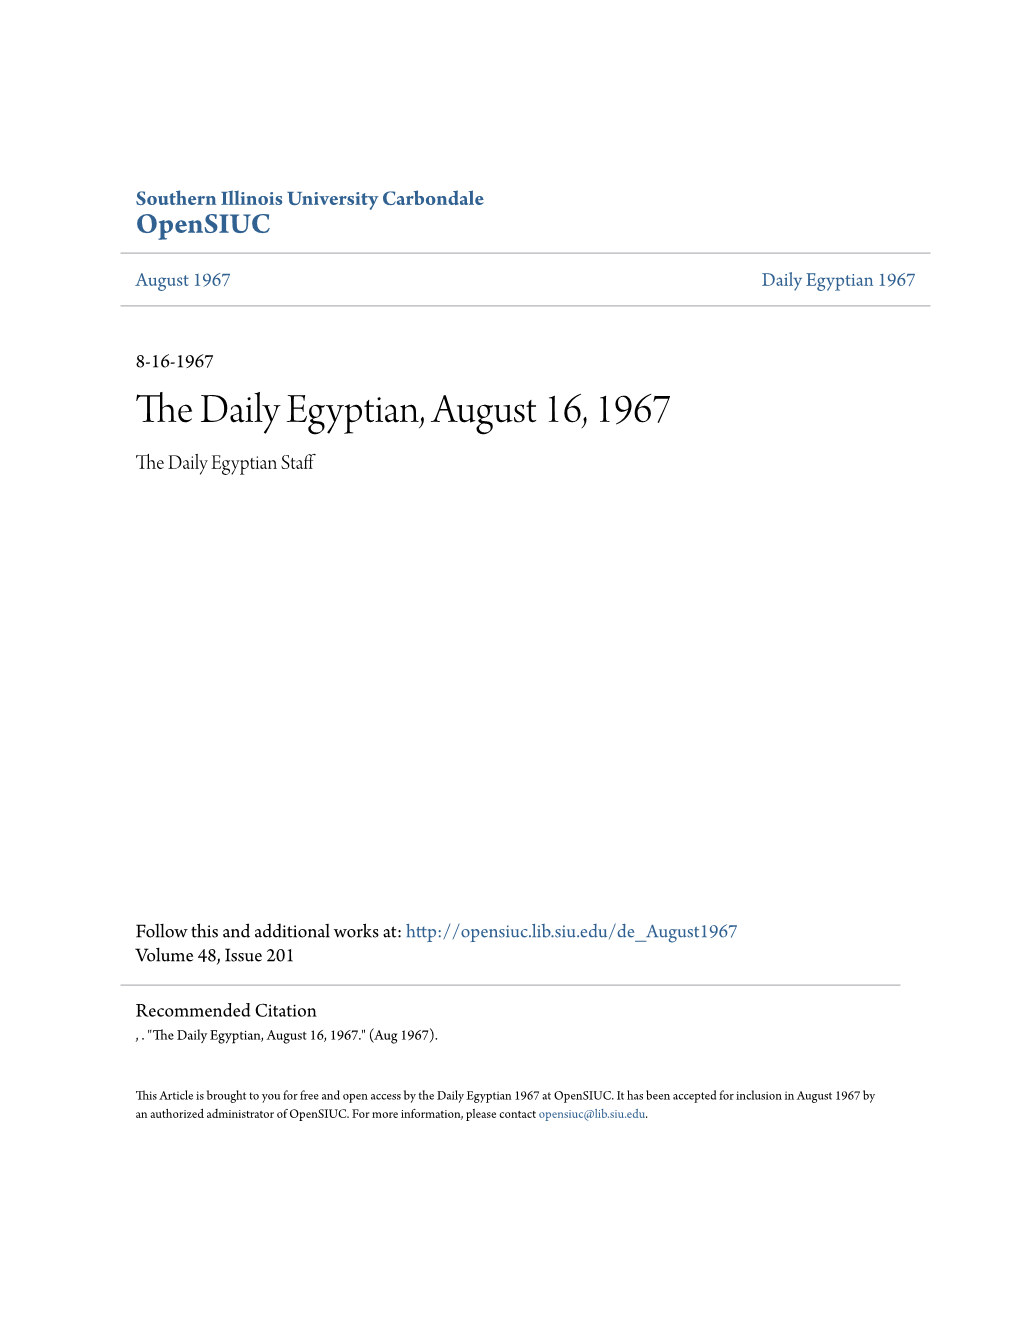 The Daily Egyptian, August 16, 1967